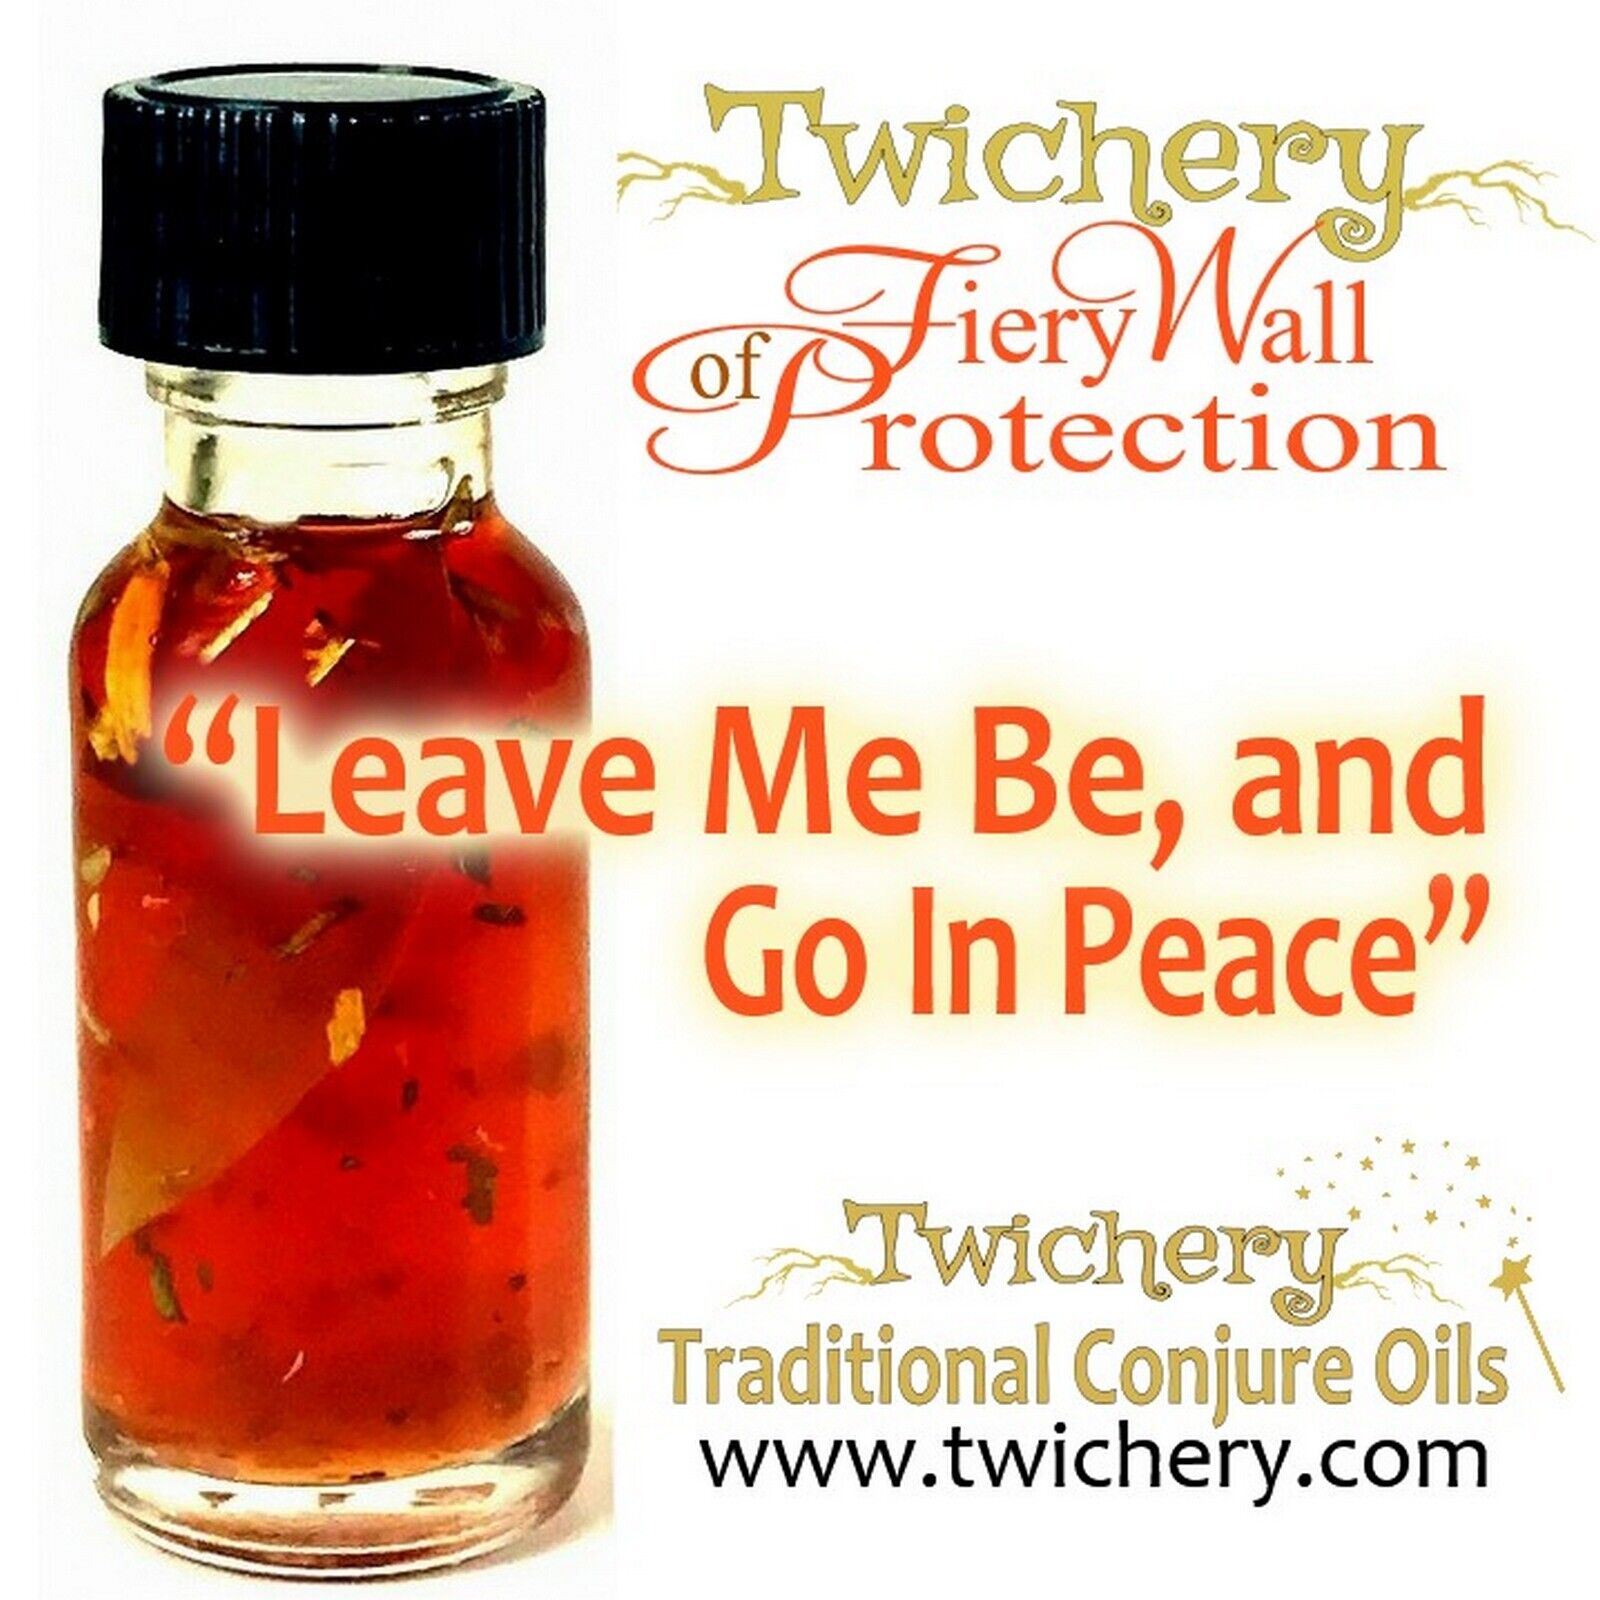 FIERY WALL OF PROTECTION OIL with Dragon's Blood, Pagan Hoodoo FROM TWICHERY